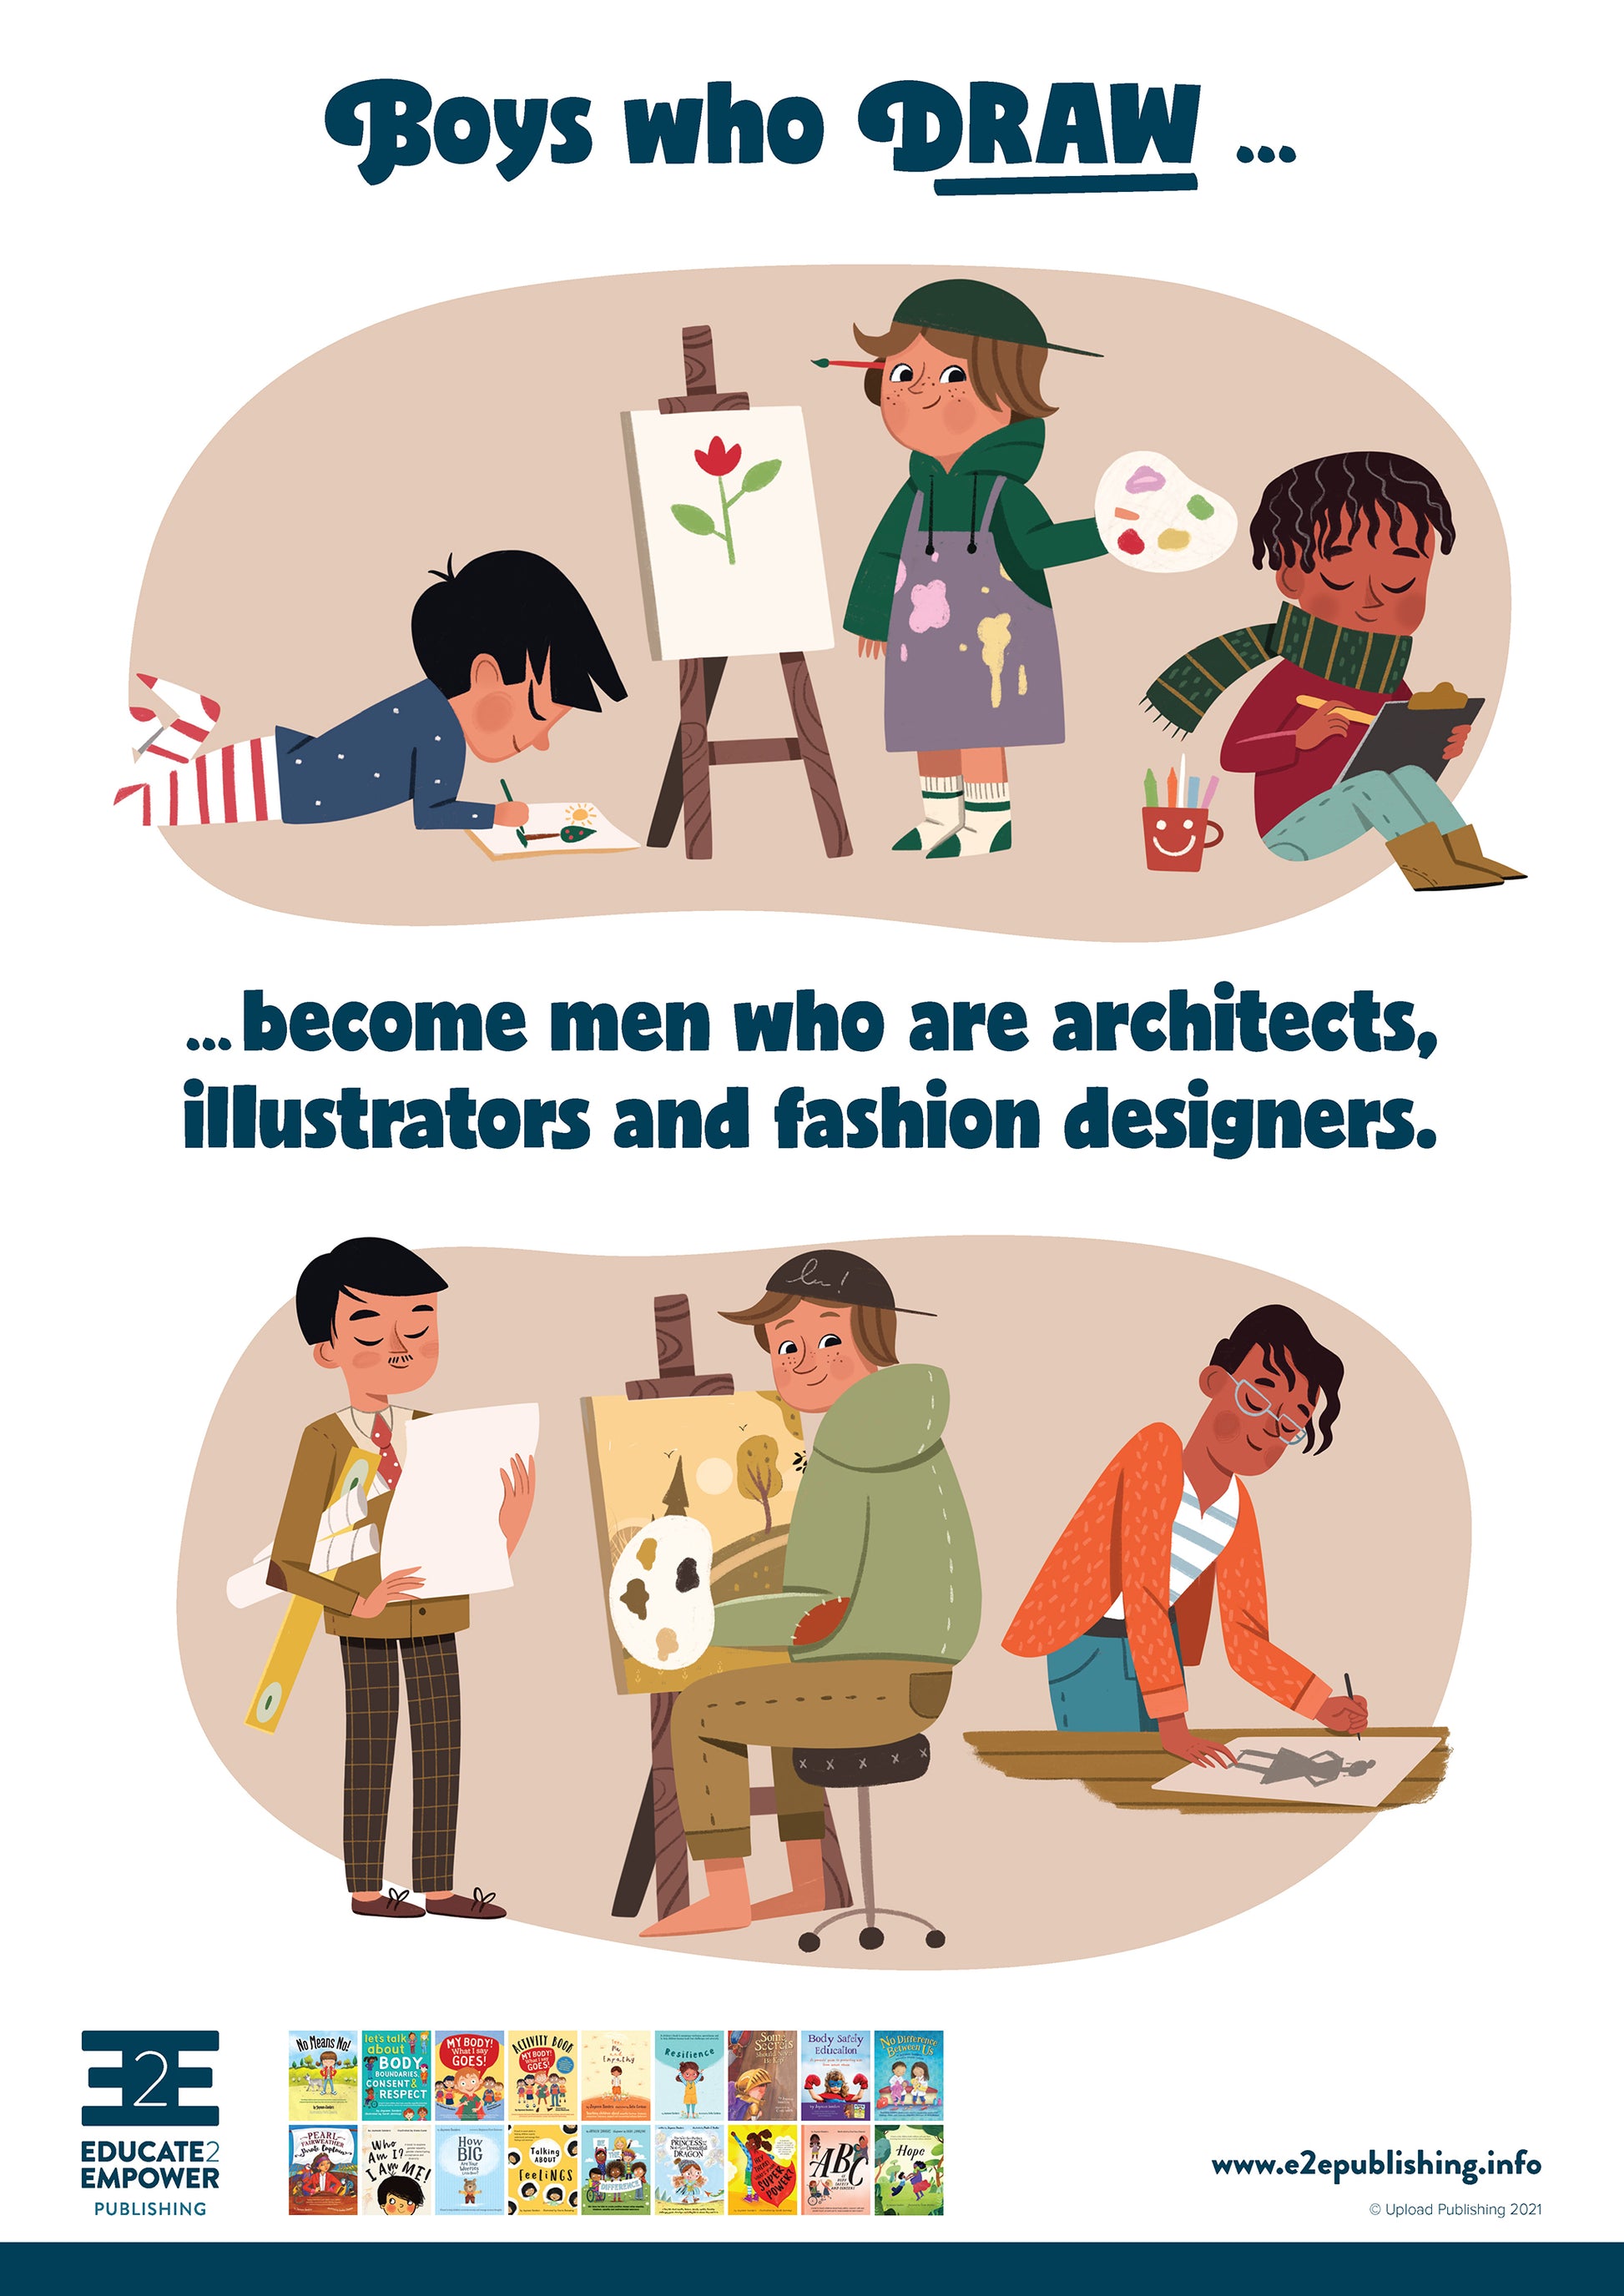 A poster for children titled 'Boys who draw... become men who are architects, illustrators and fashion designers. This is accompanied by a cartoon image of three young boys drawing and painting. Below this is the same boys working as an architect, an artist and a fashion designer.